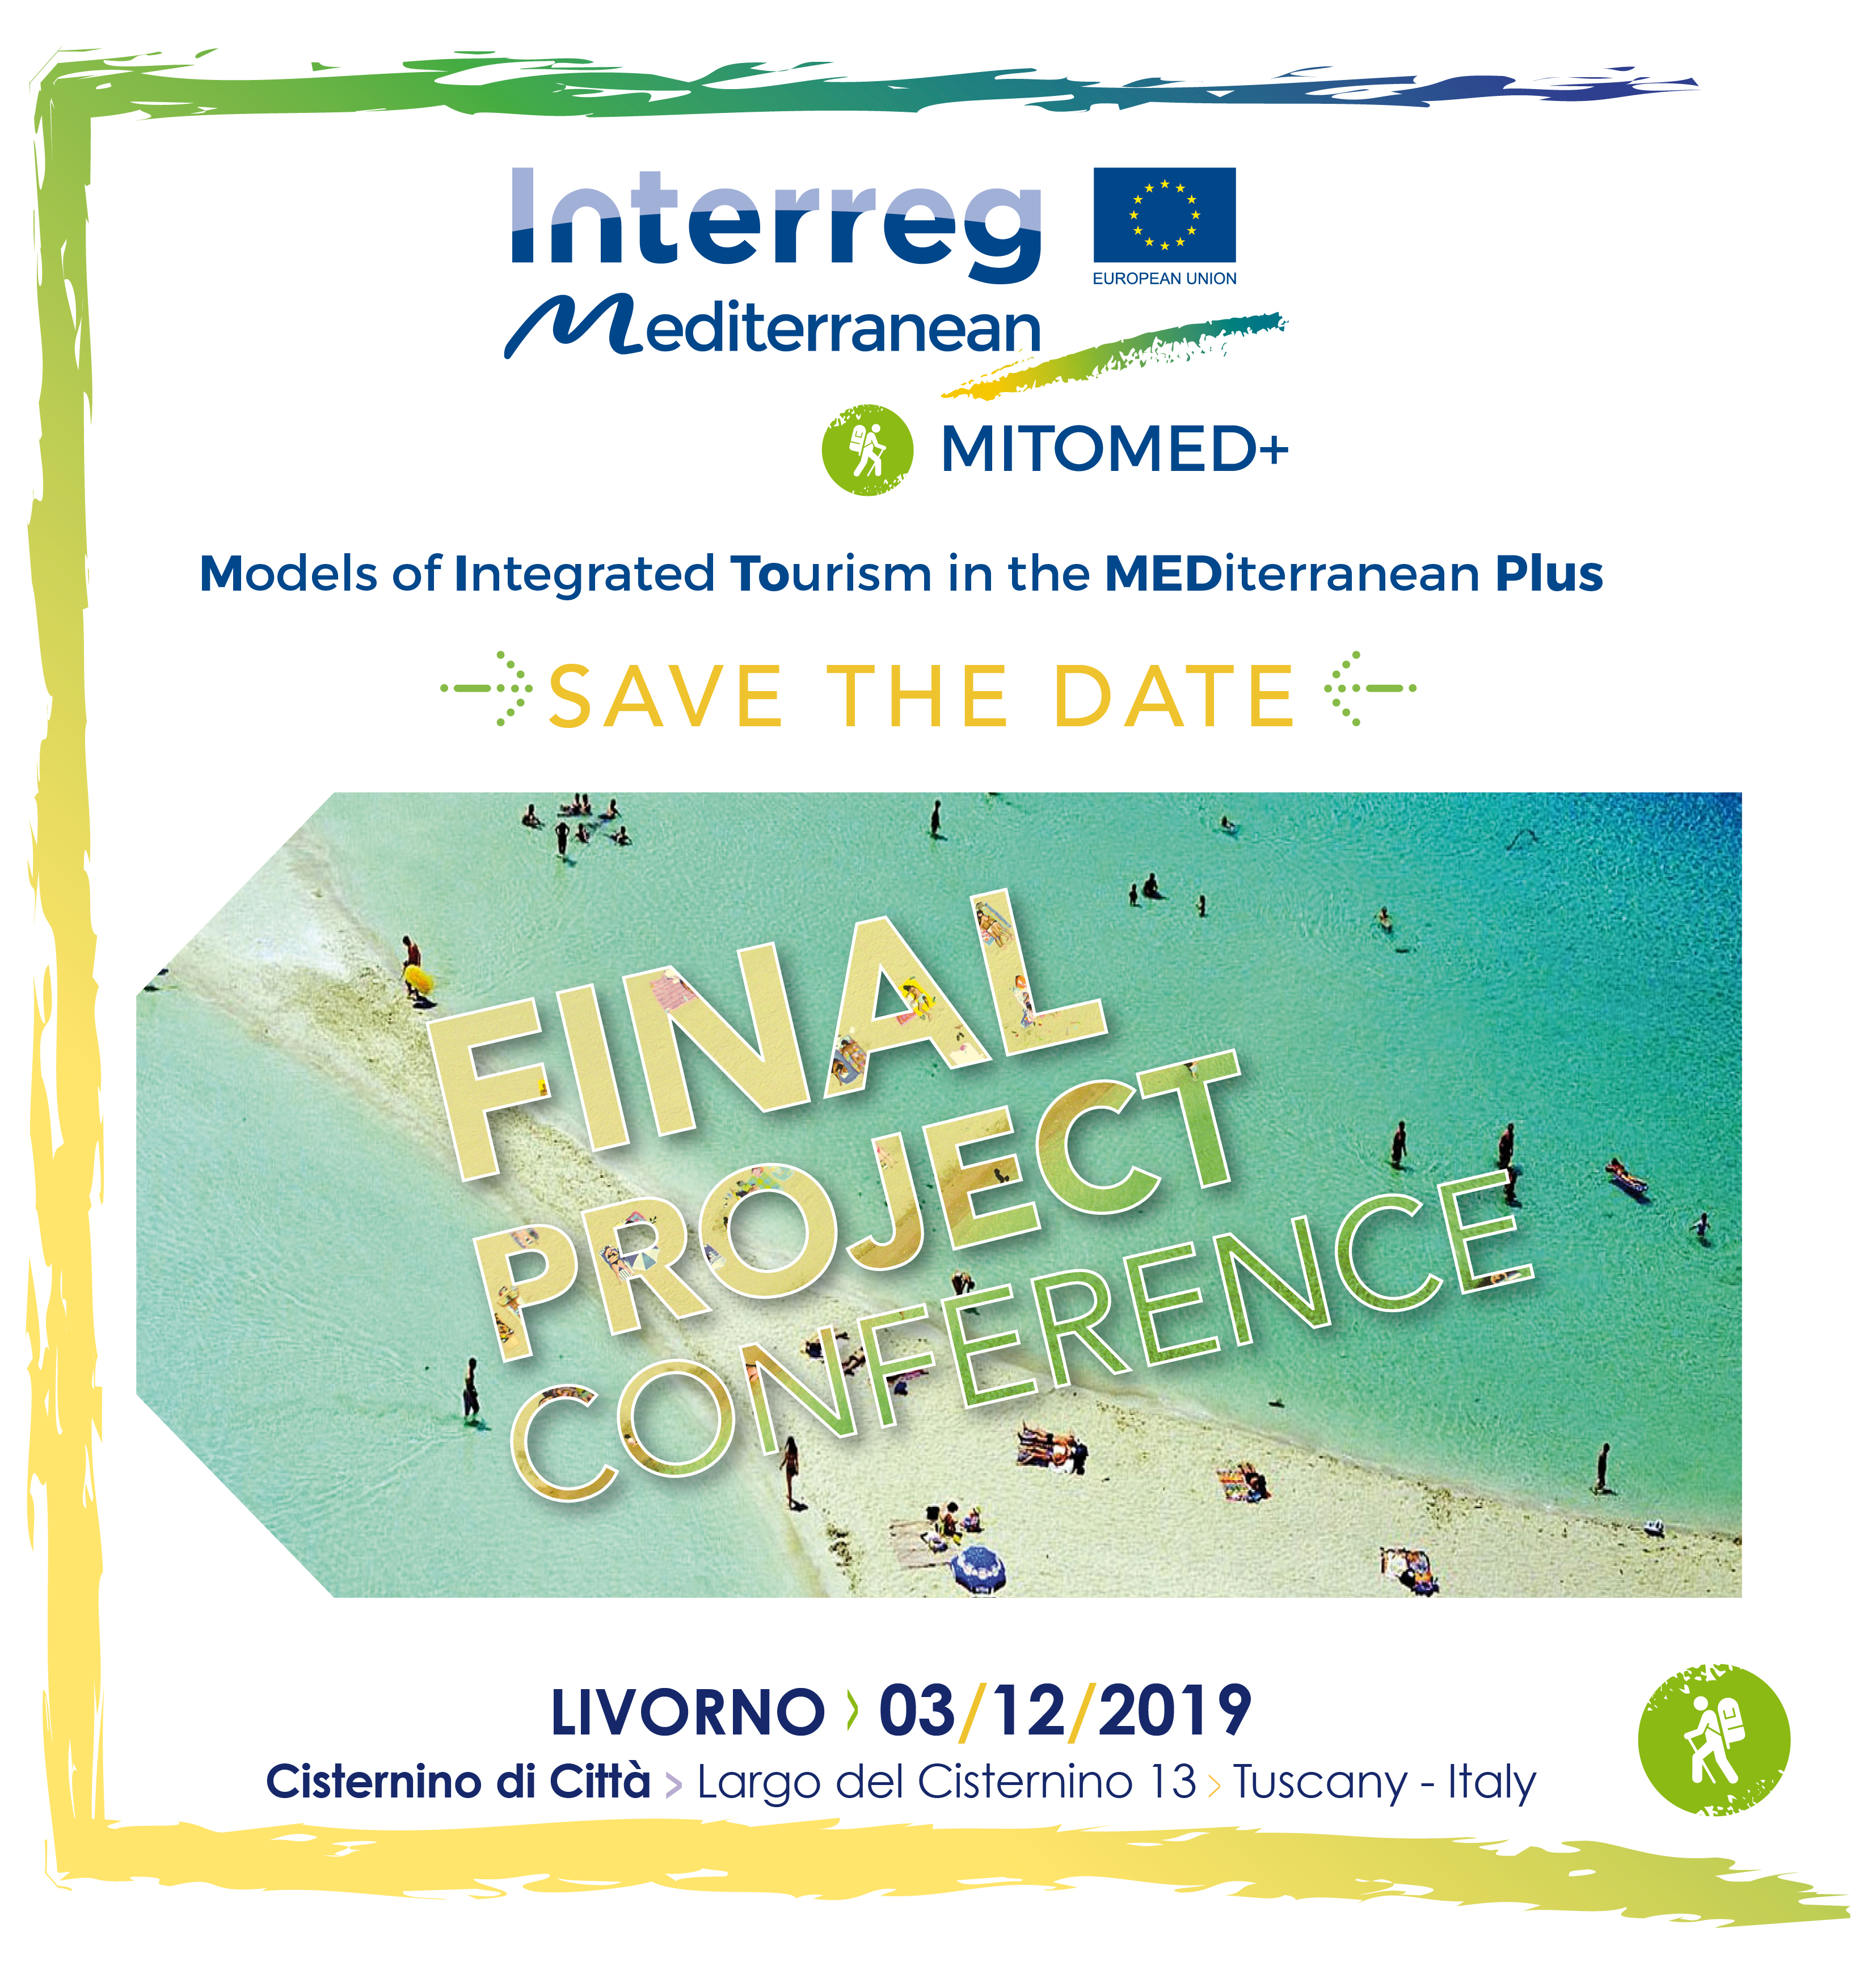 MITOMED+ Final Project Conference